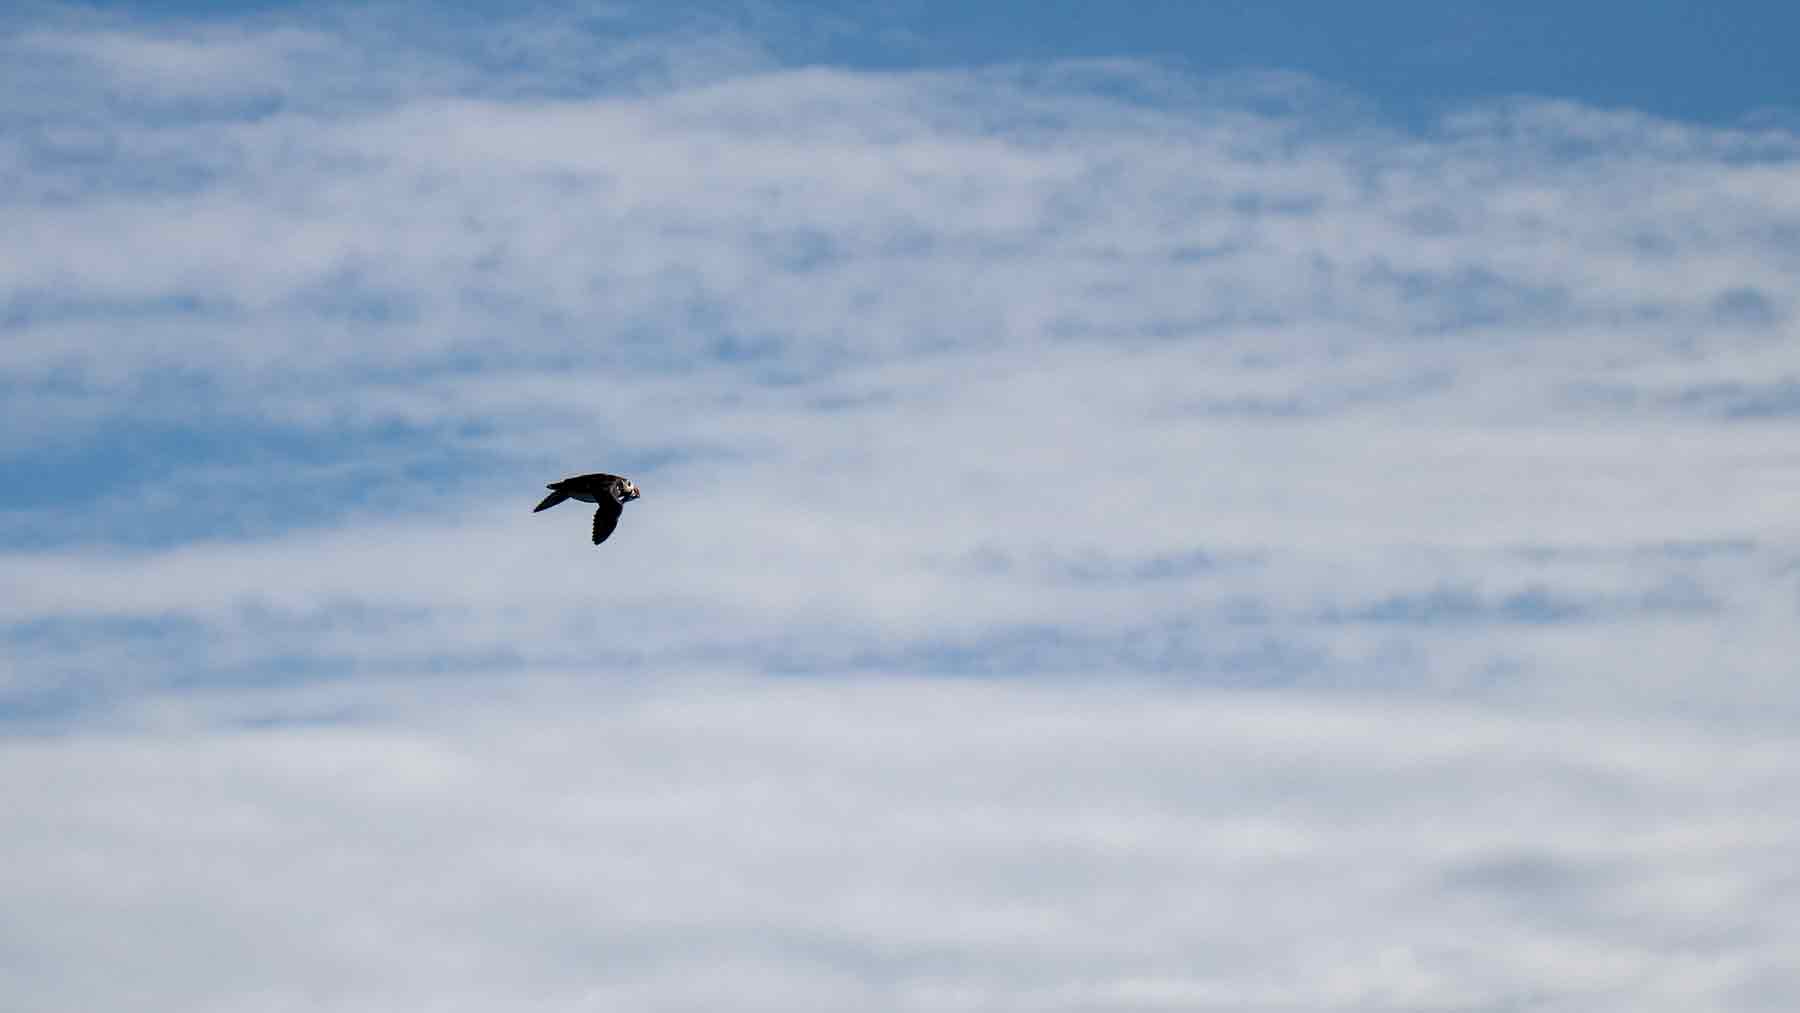 Puffin flying with a background of white clouds near Small Fogo Island